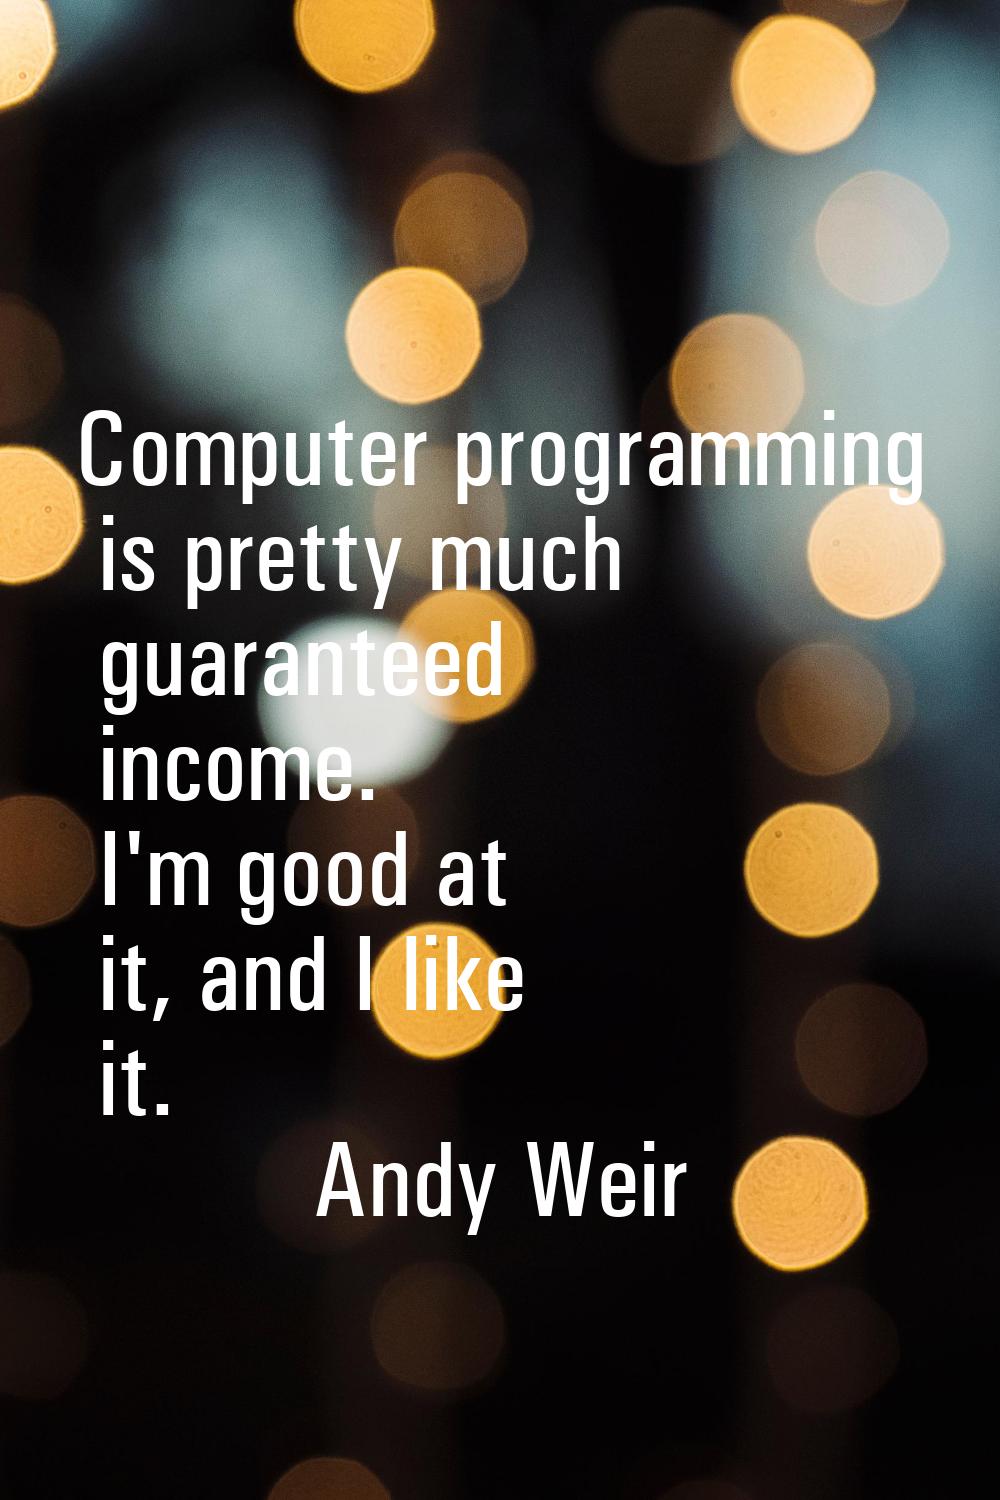 Computer programming is pretty much guaranteed income. I'm good at it, and I like it.